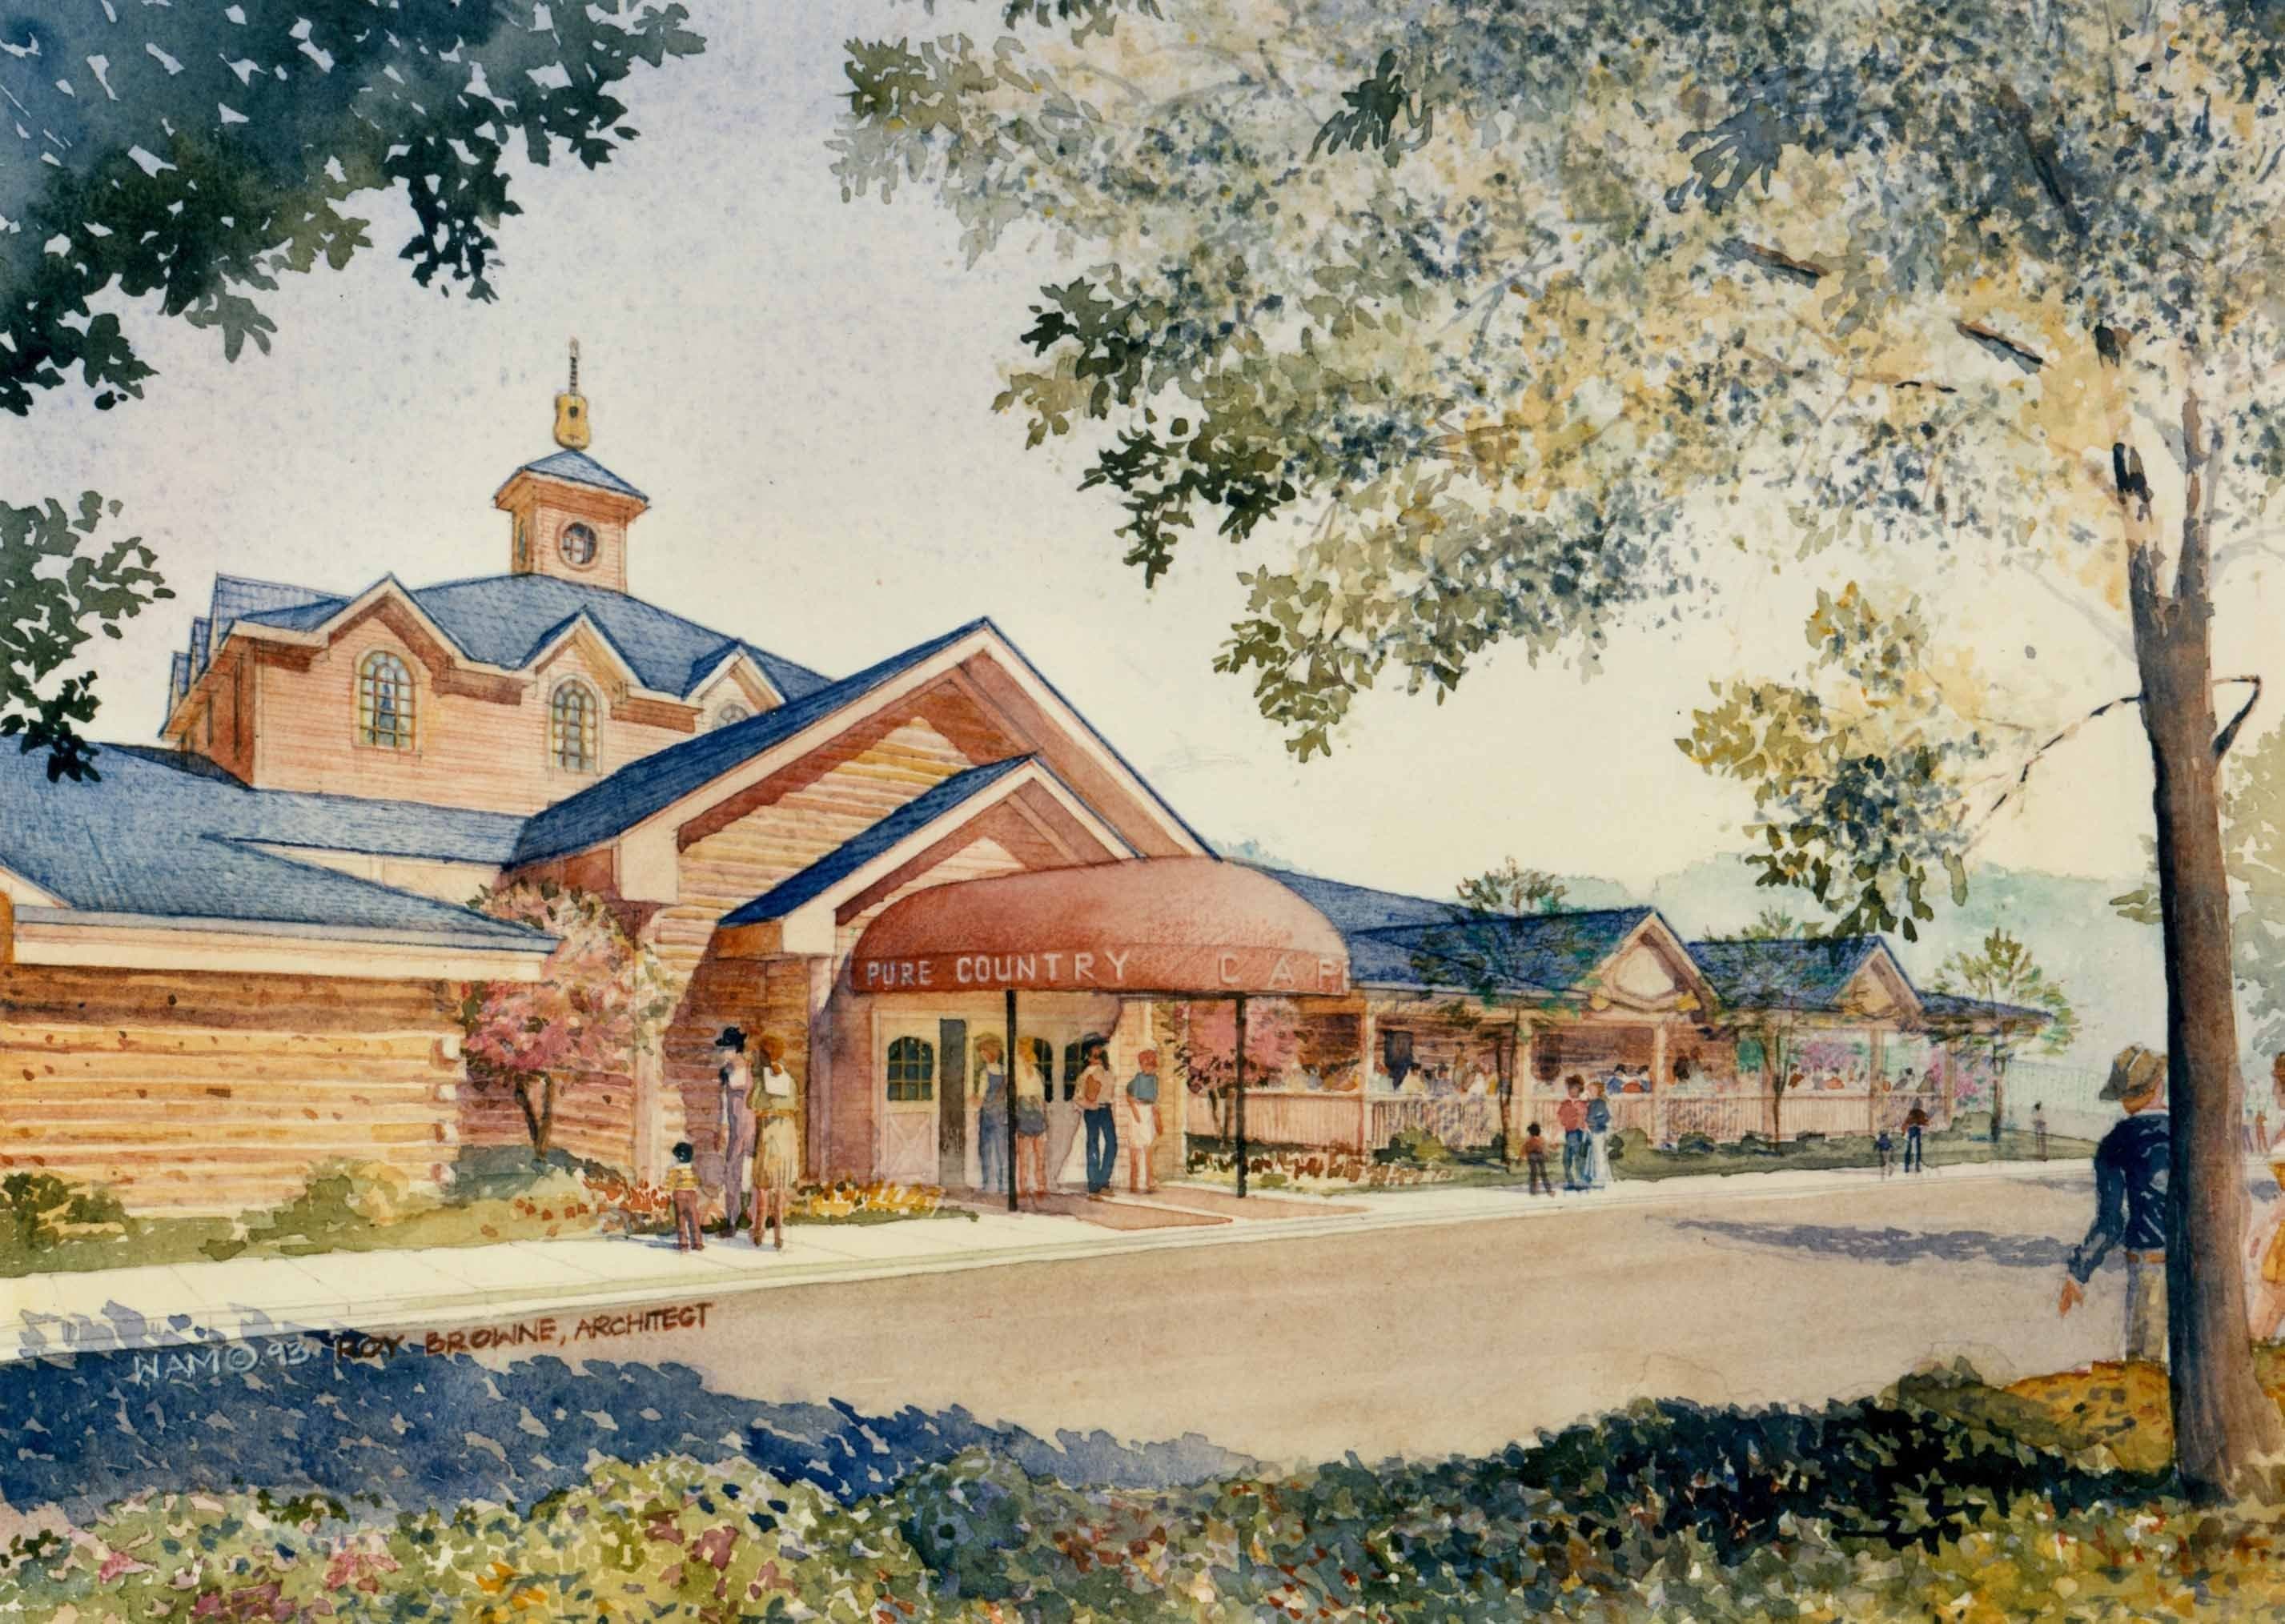 Pure Country Cafe Proposal